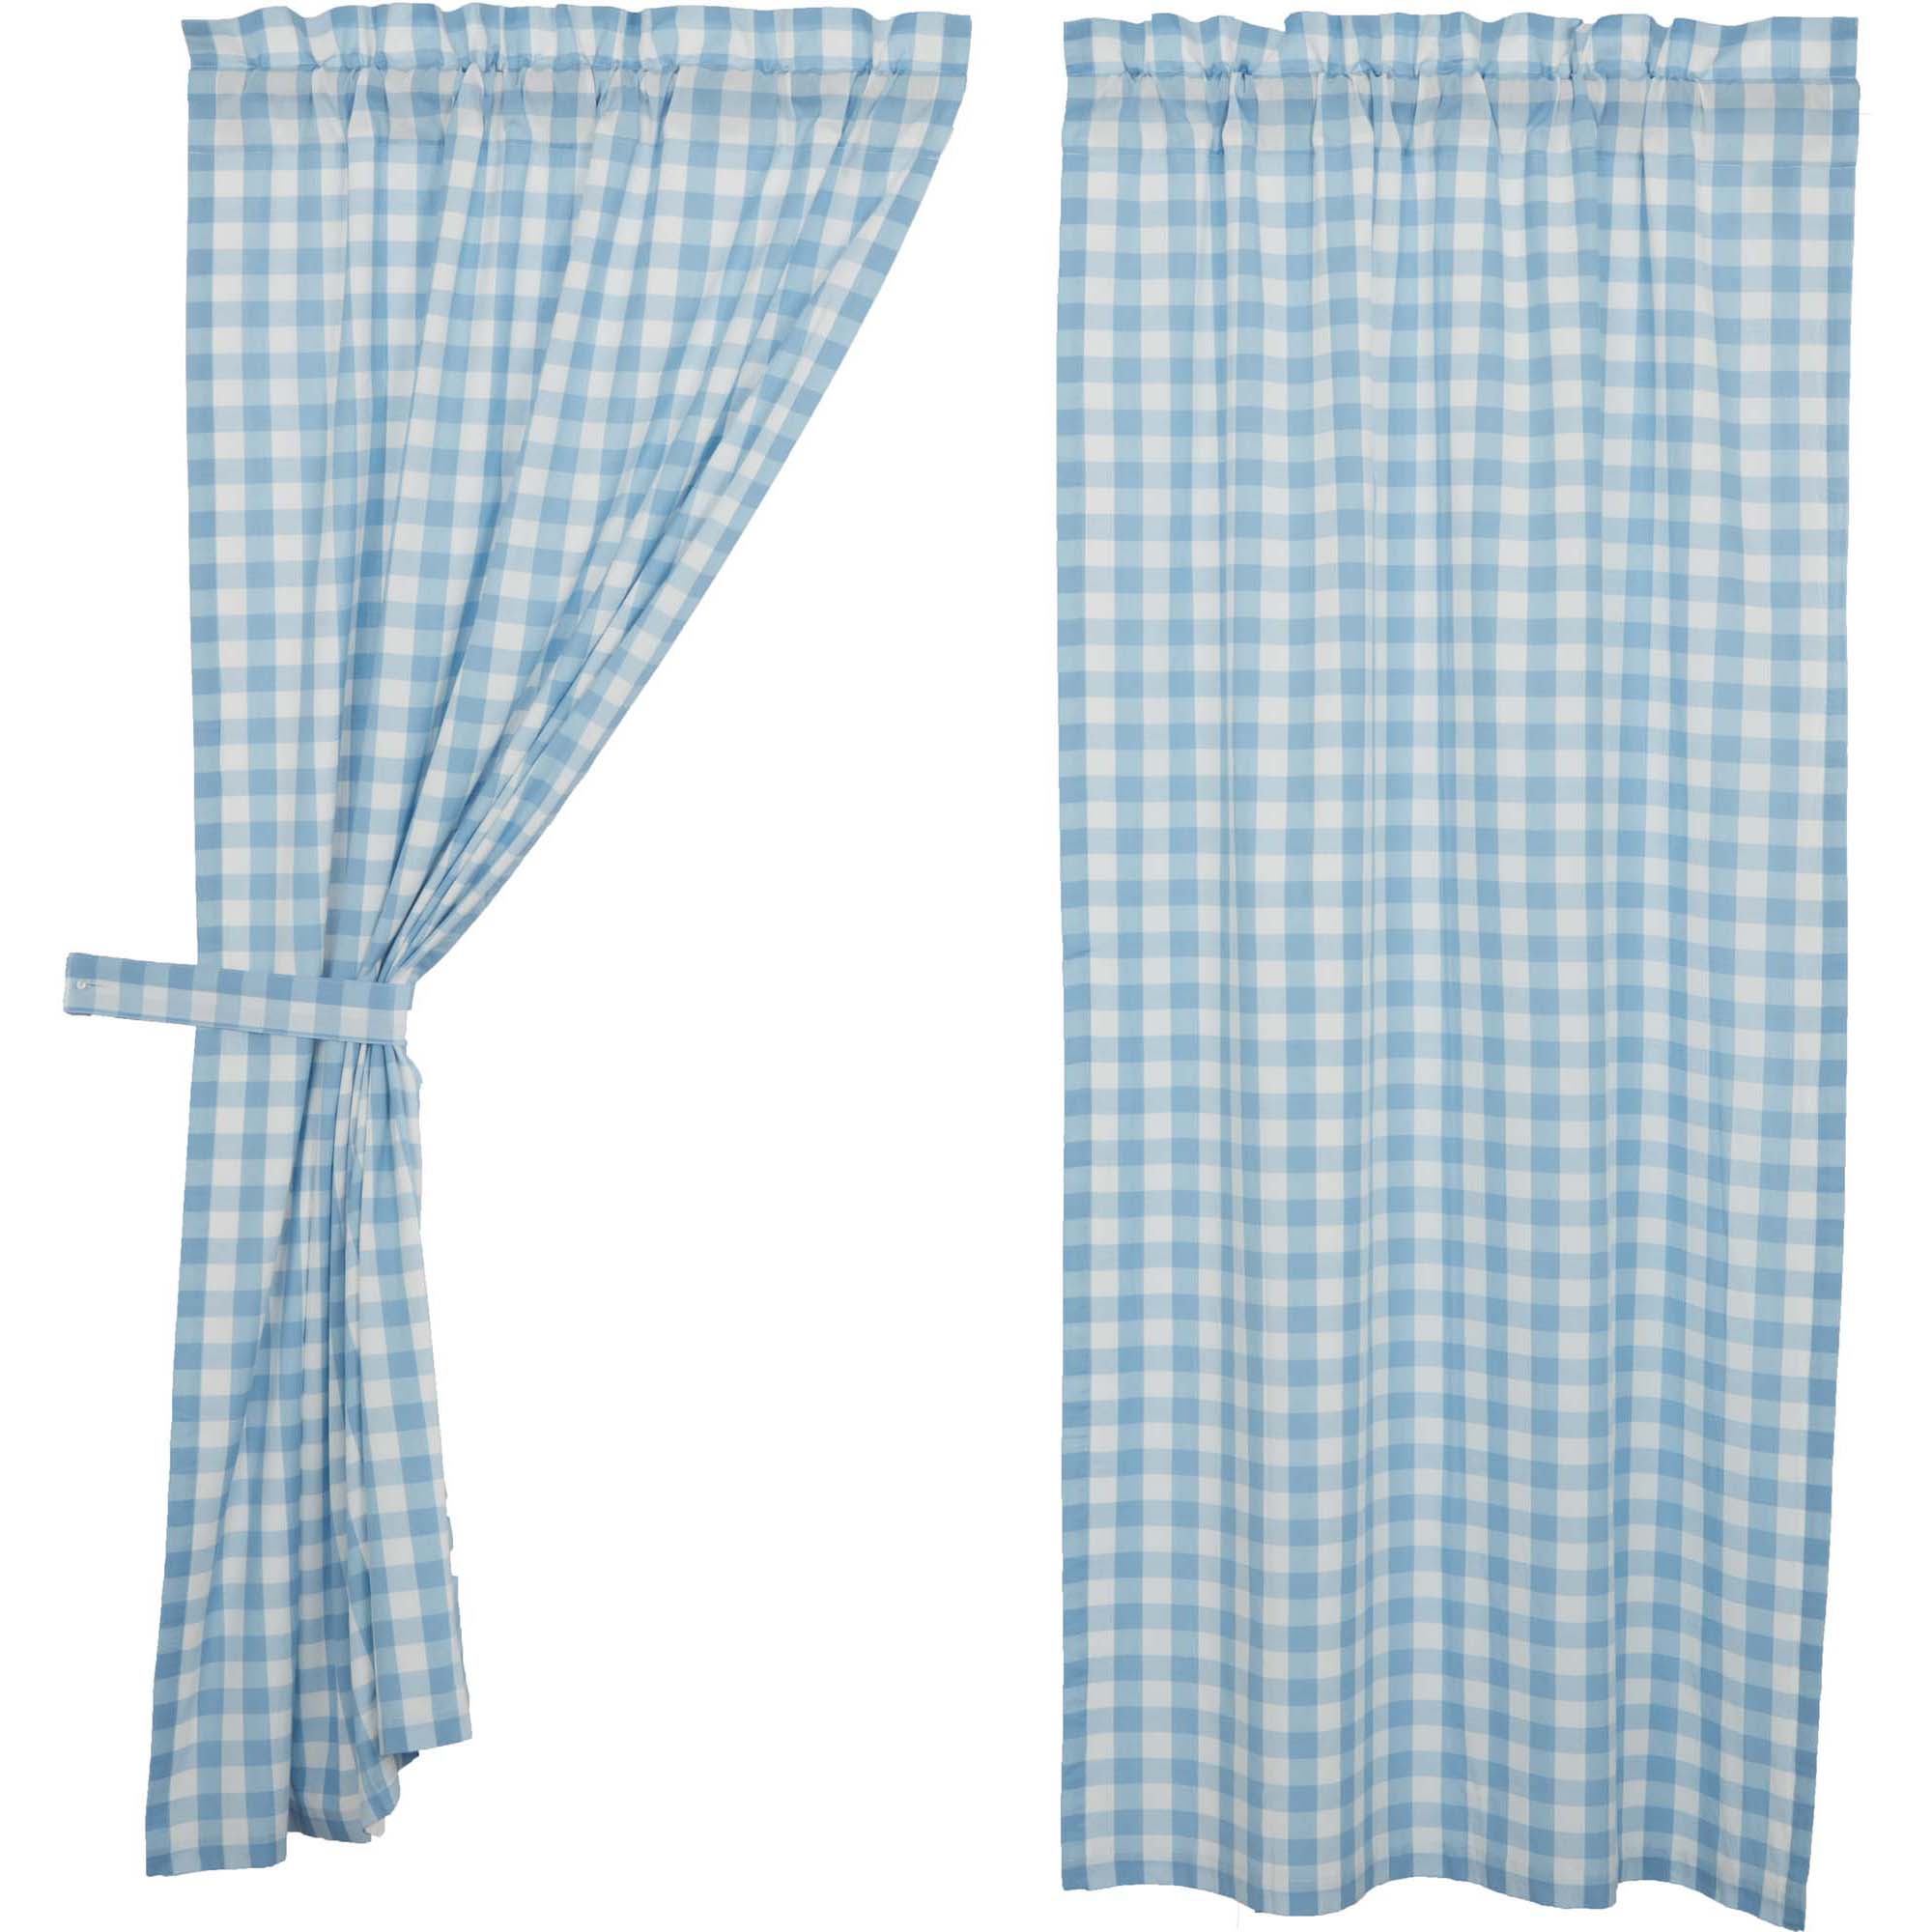 April & Olive Annie Buffalo Blue Check Short Panel Set of 2 63x36 By VHC Brands